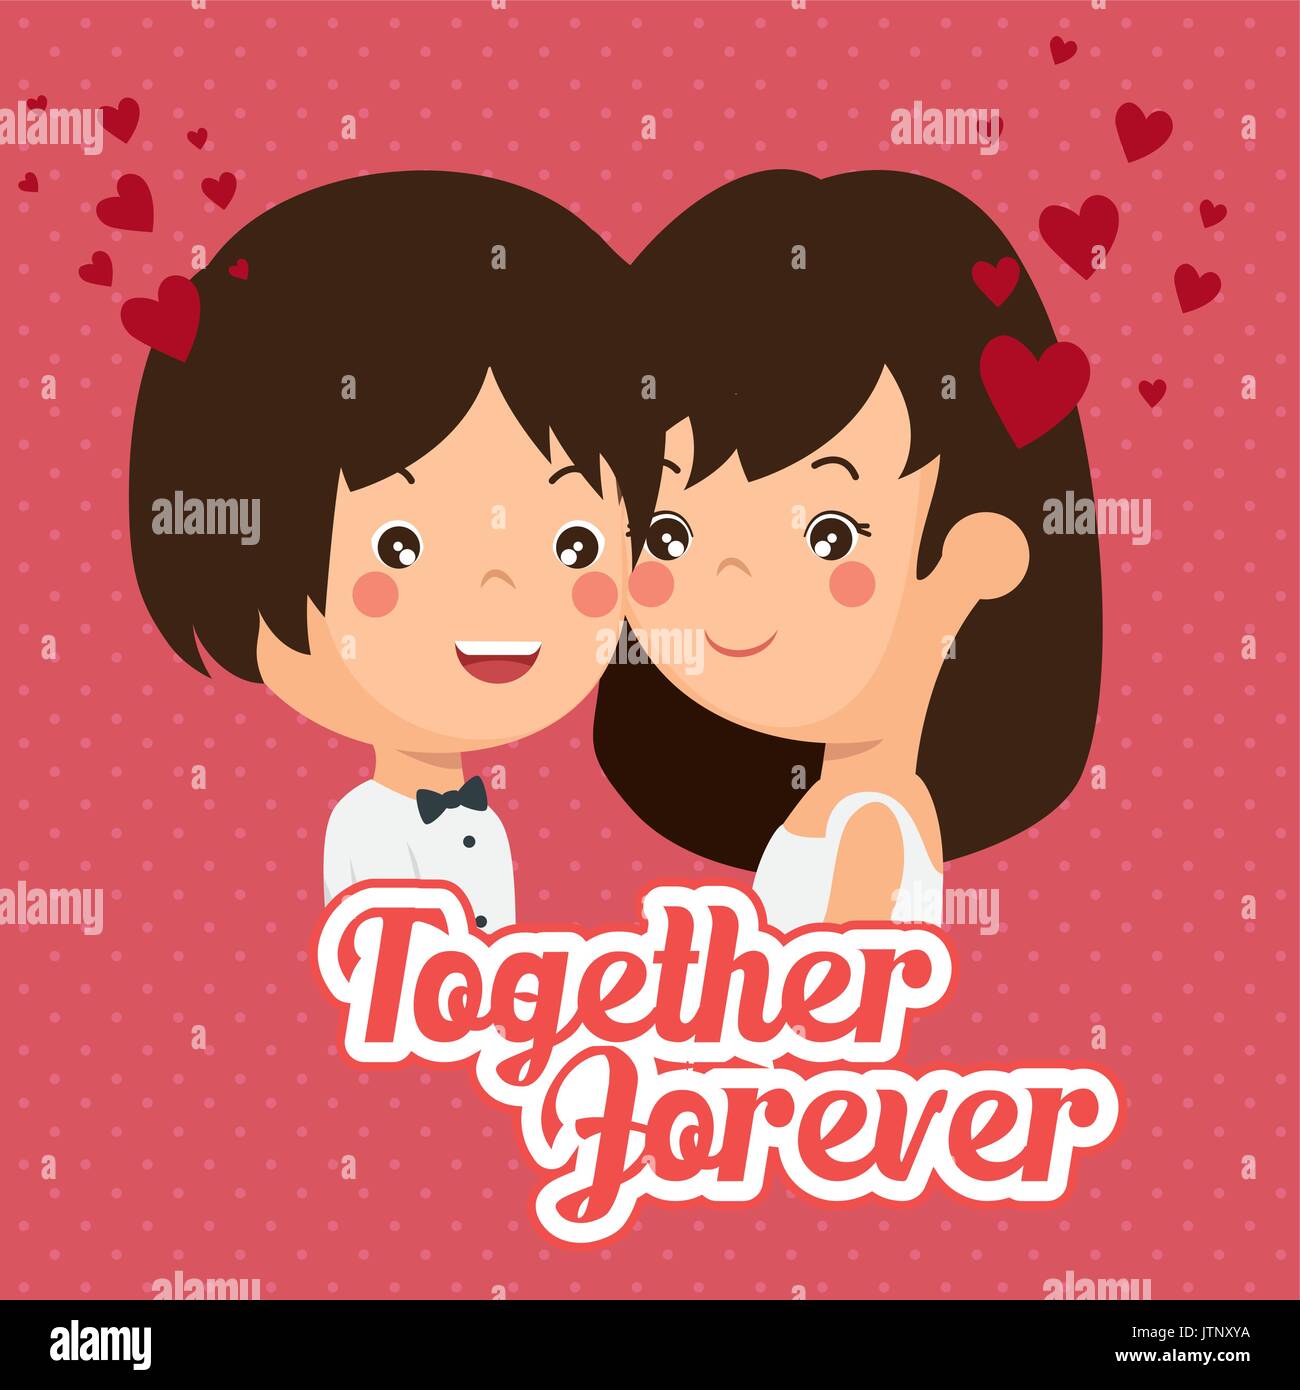 couple in love together forever vector illustration graphic design Stock Vector